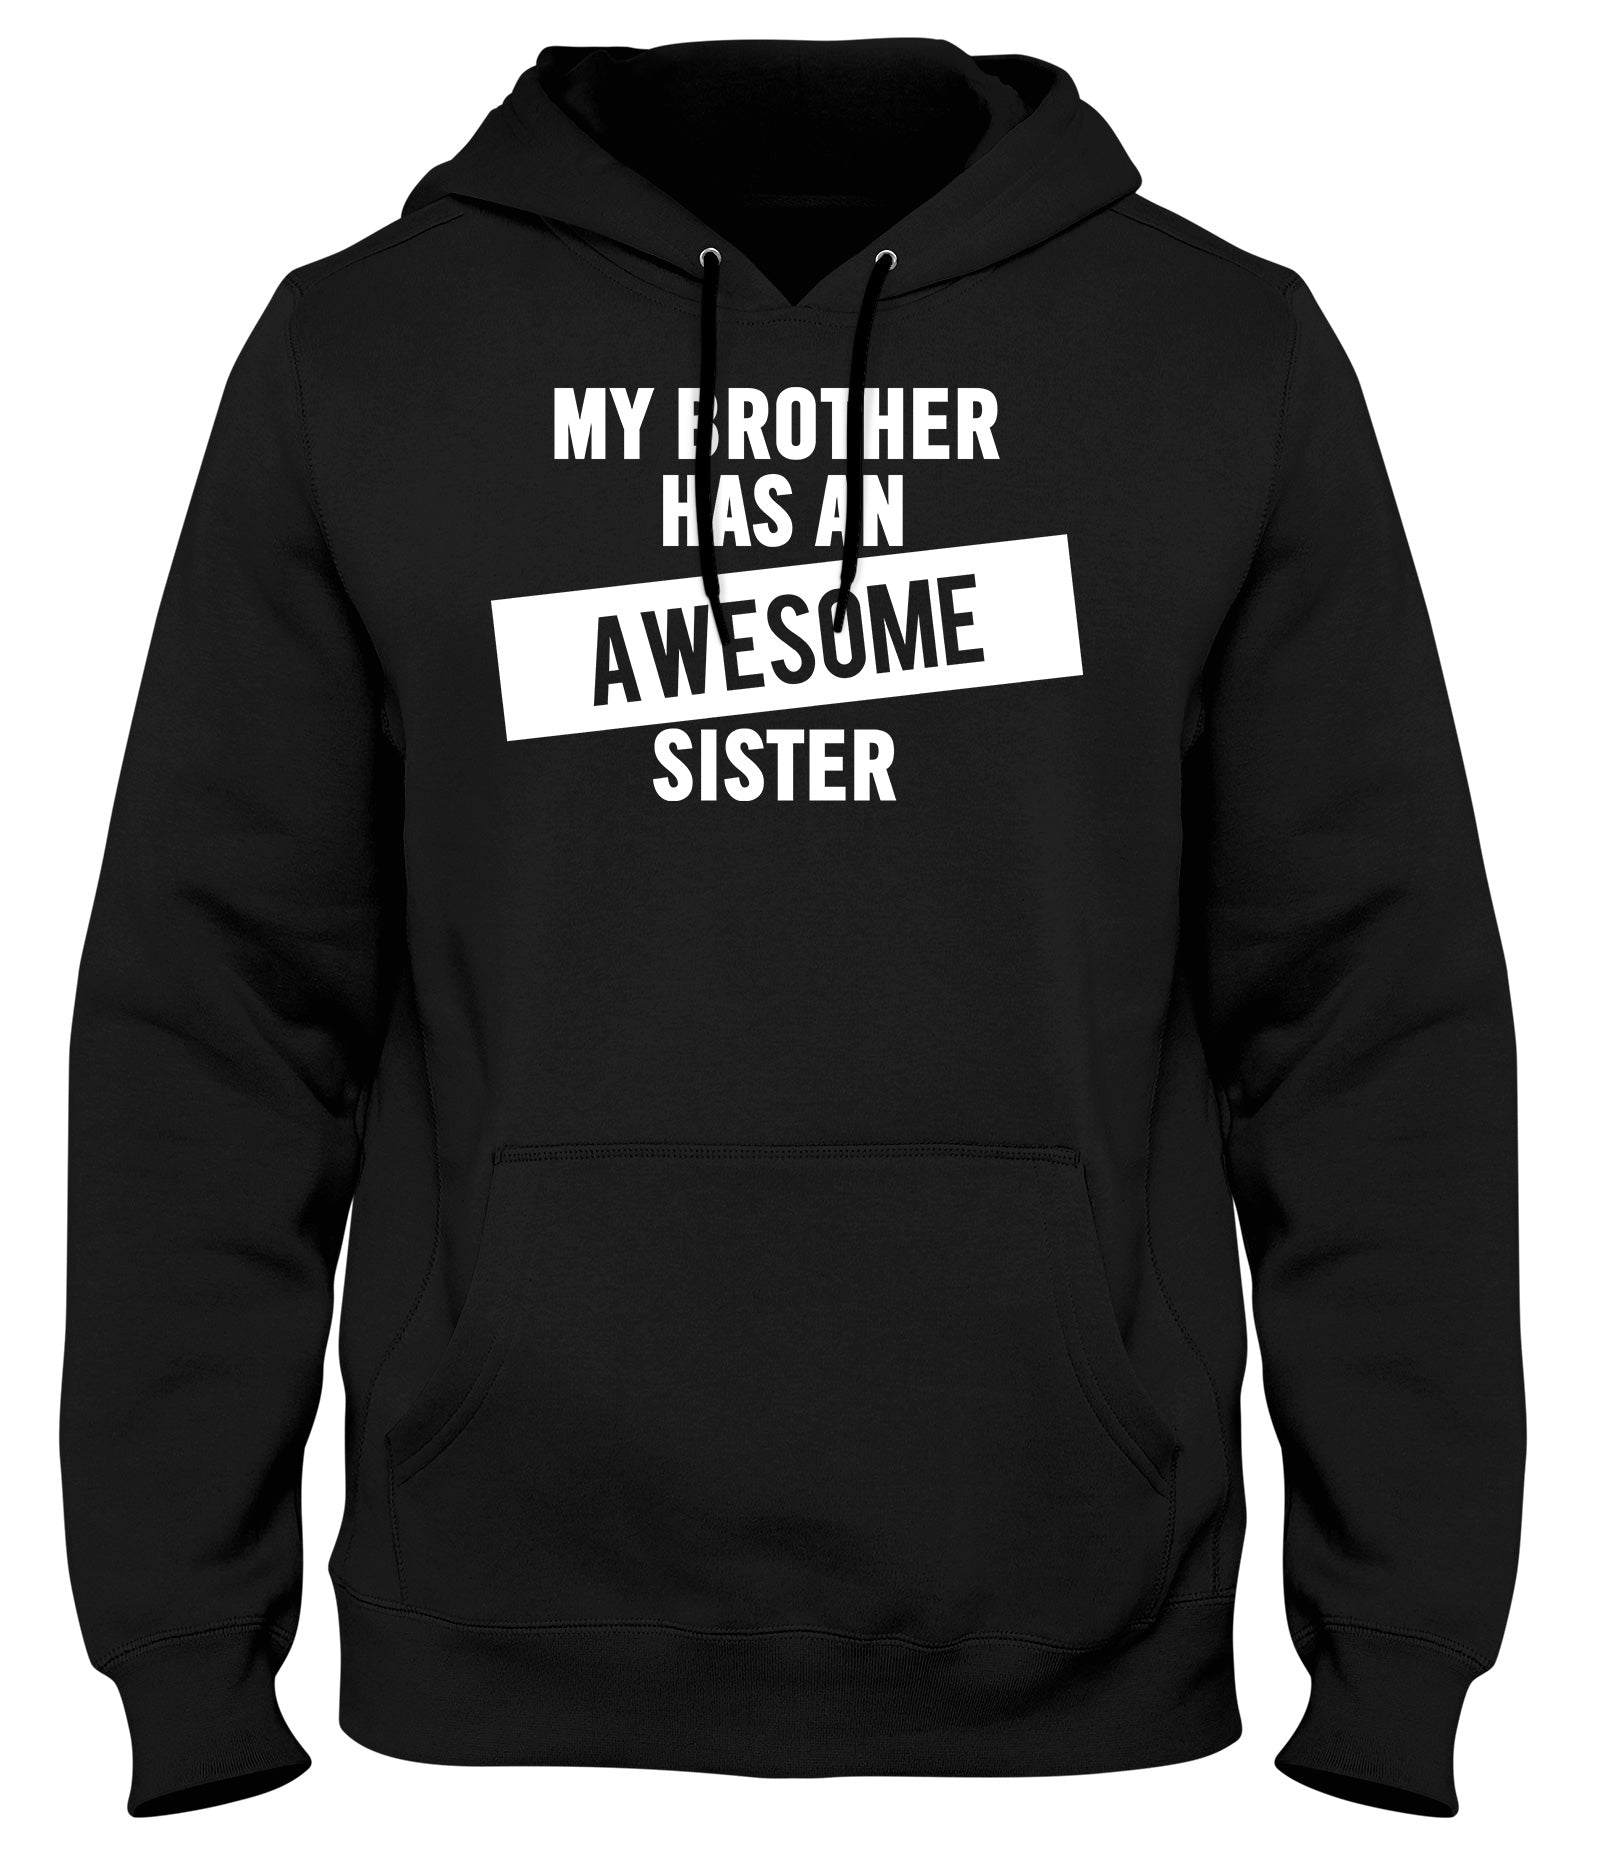 MY BROTHER HAS AN AWESOME SISTER WOMENS LADIES MENS UNISEX HOODIE